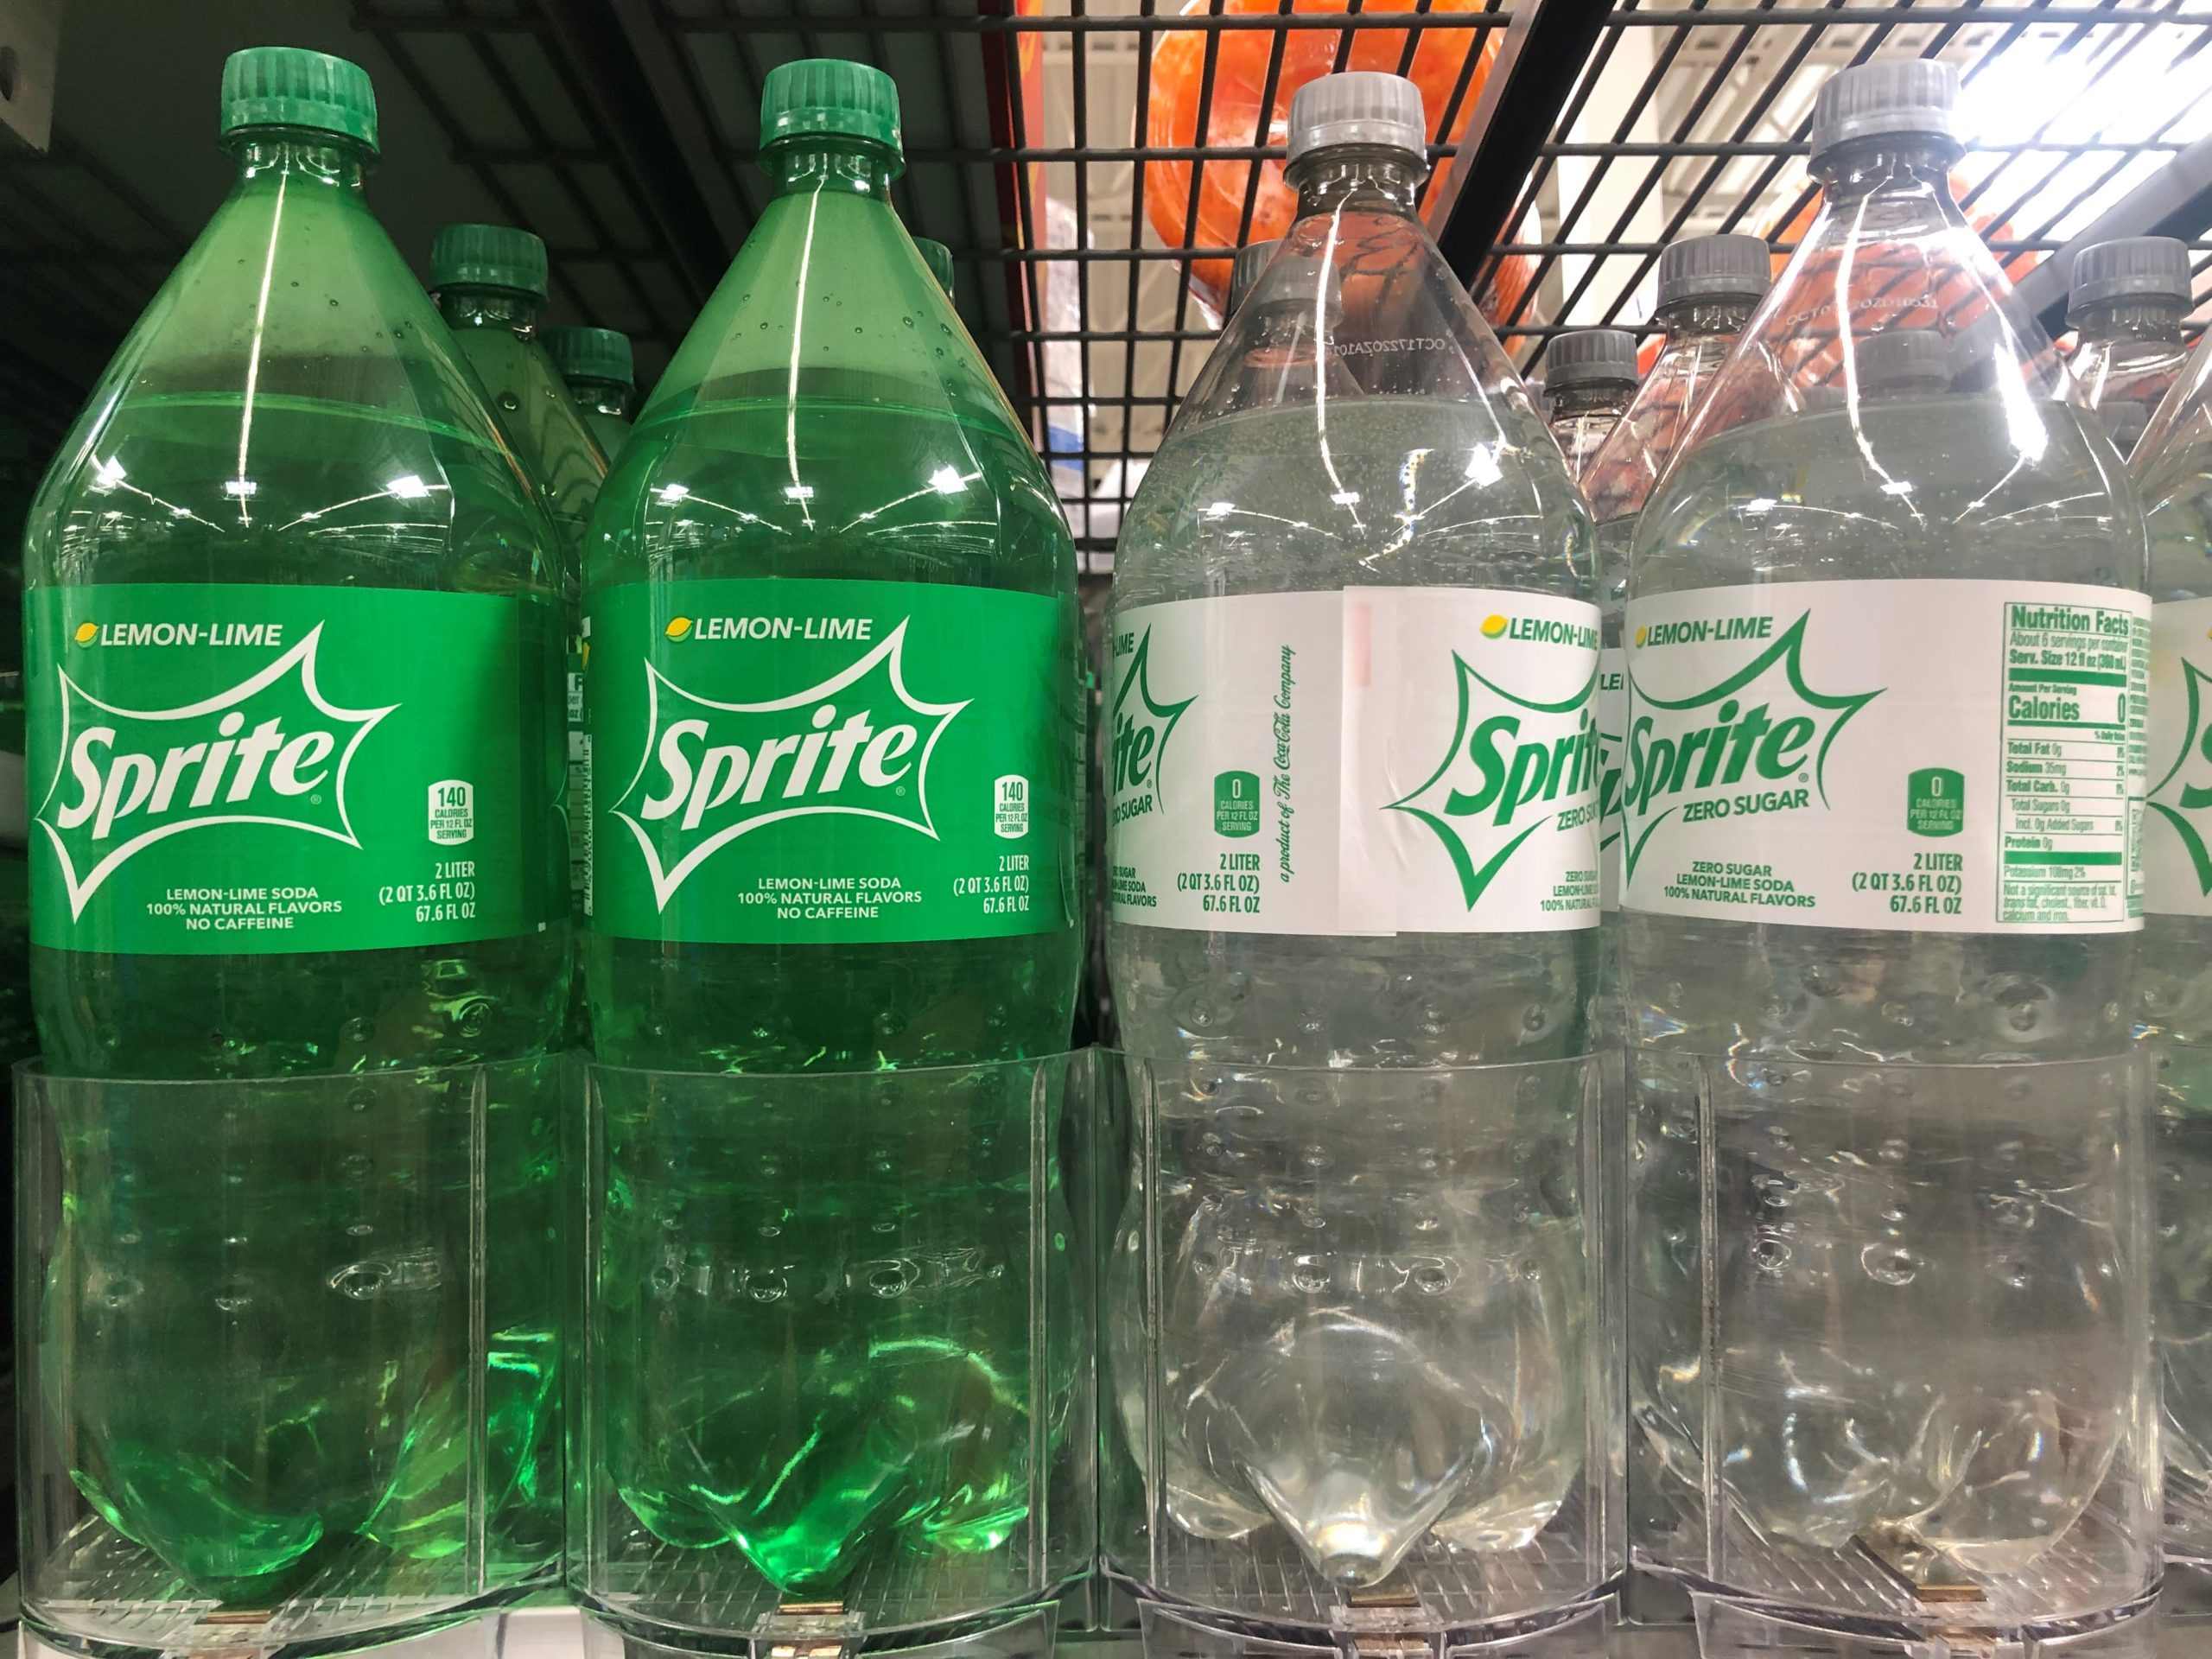 Sprite bottles go clear for greater recyclability